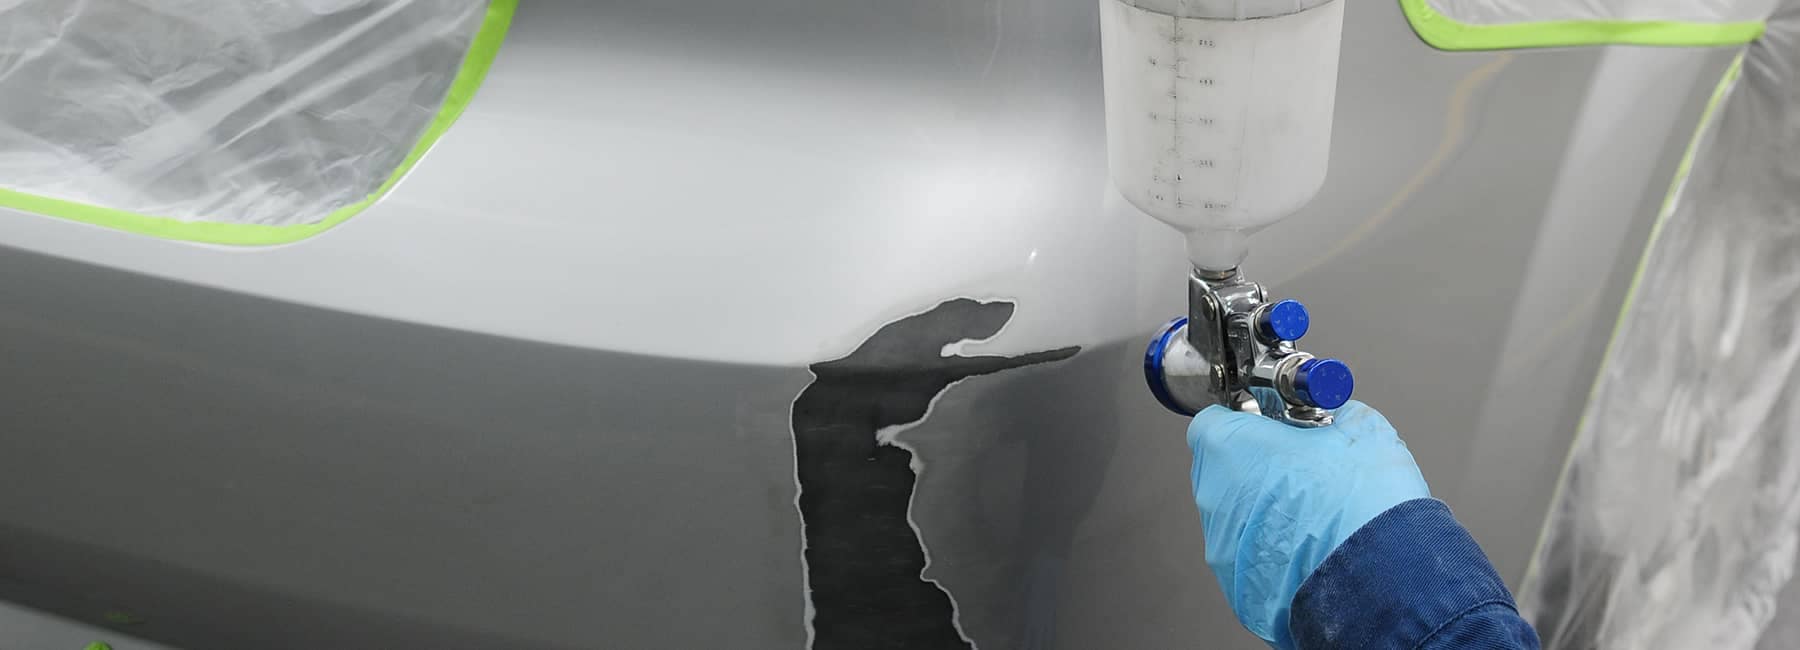 technician gets ready to spray paint on car body repair